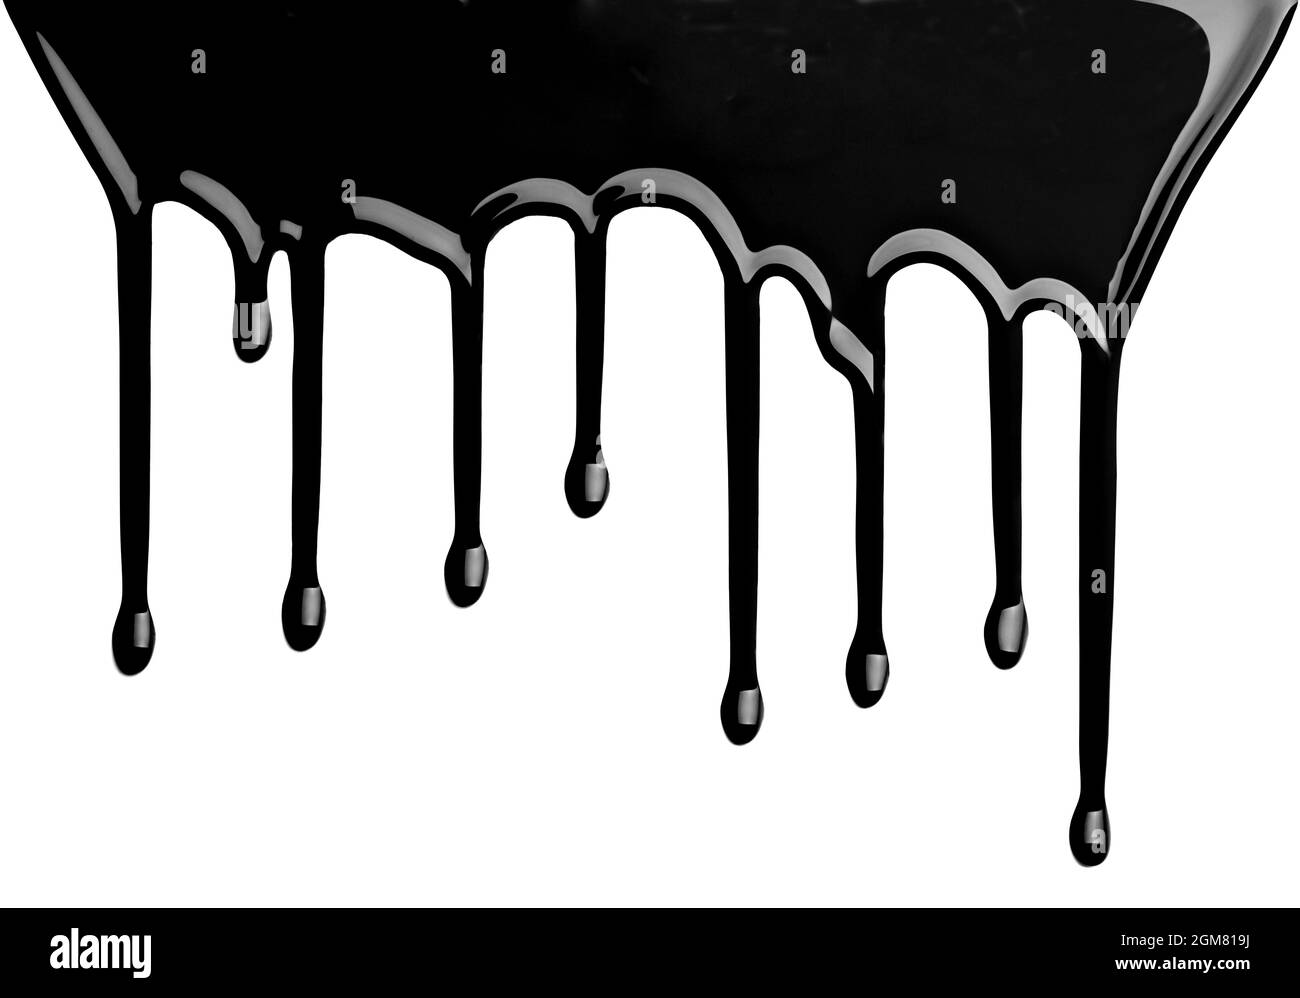 Paint splatter Black and White Stock Photos & Images - Alamy